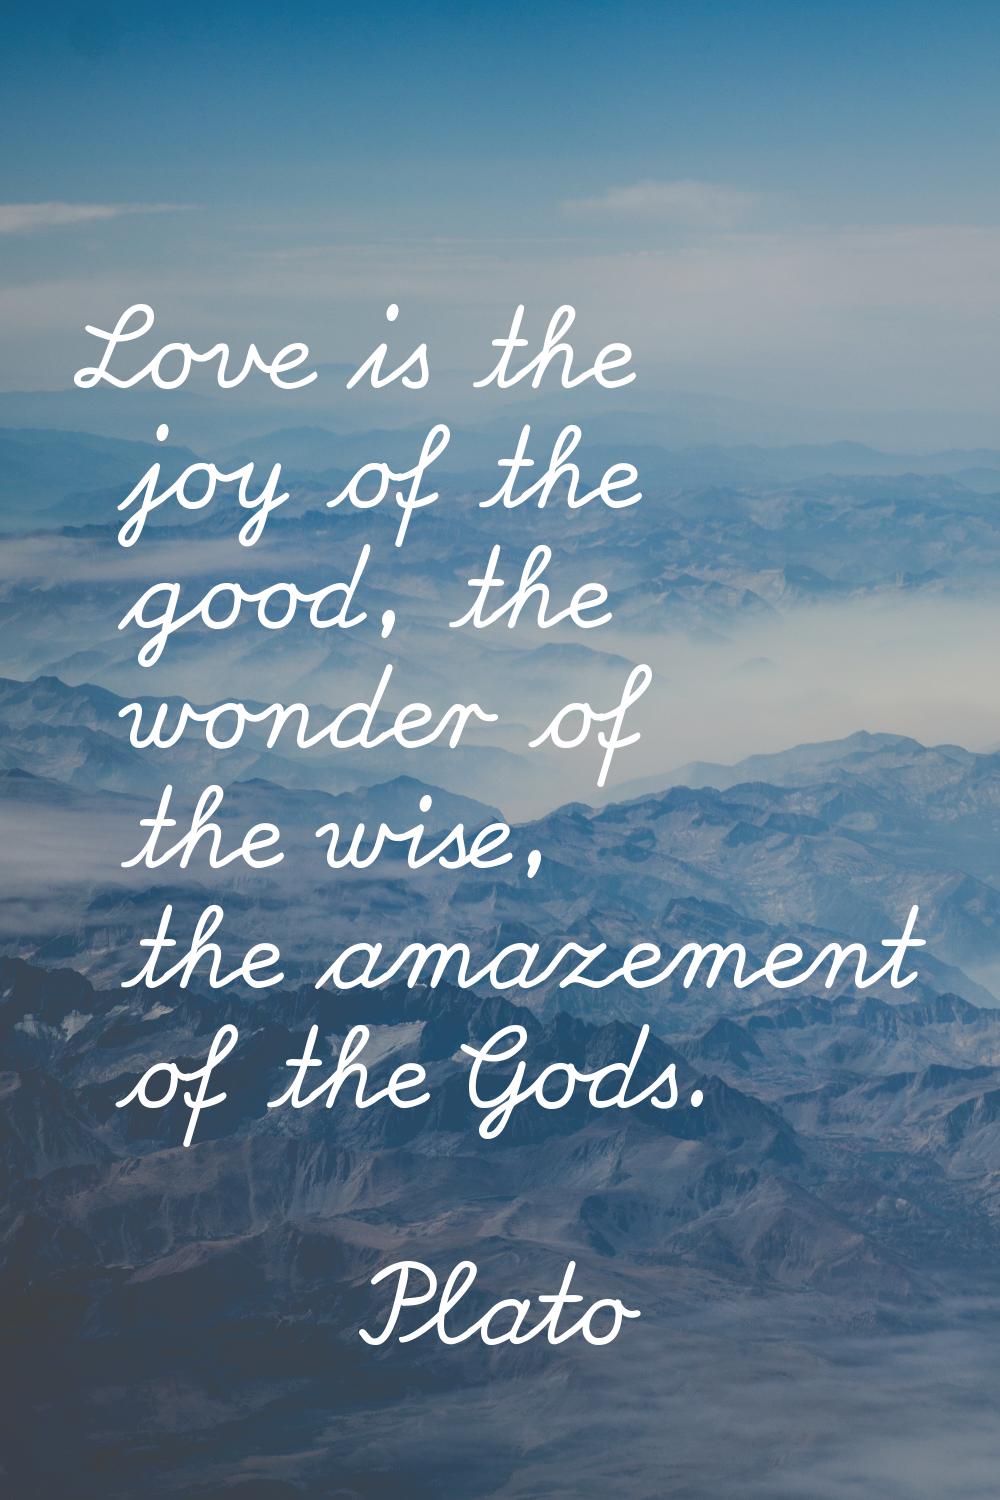 Love is the joy of the good, the wonder of the wise, the amazement of the Gods.